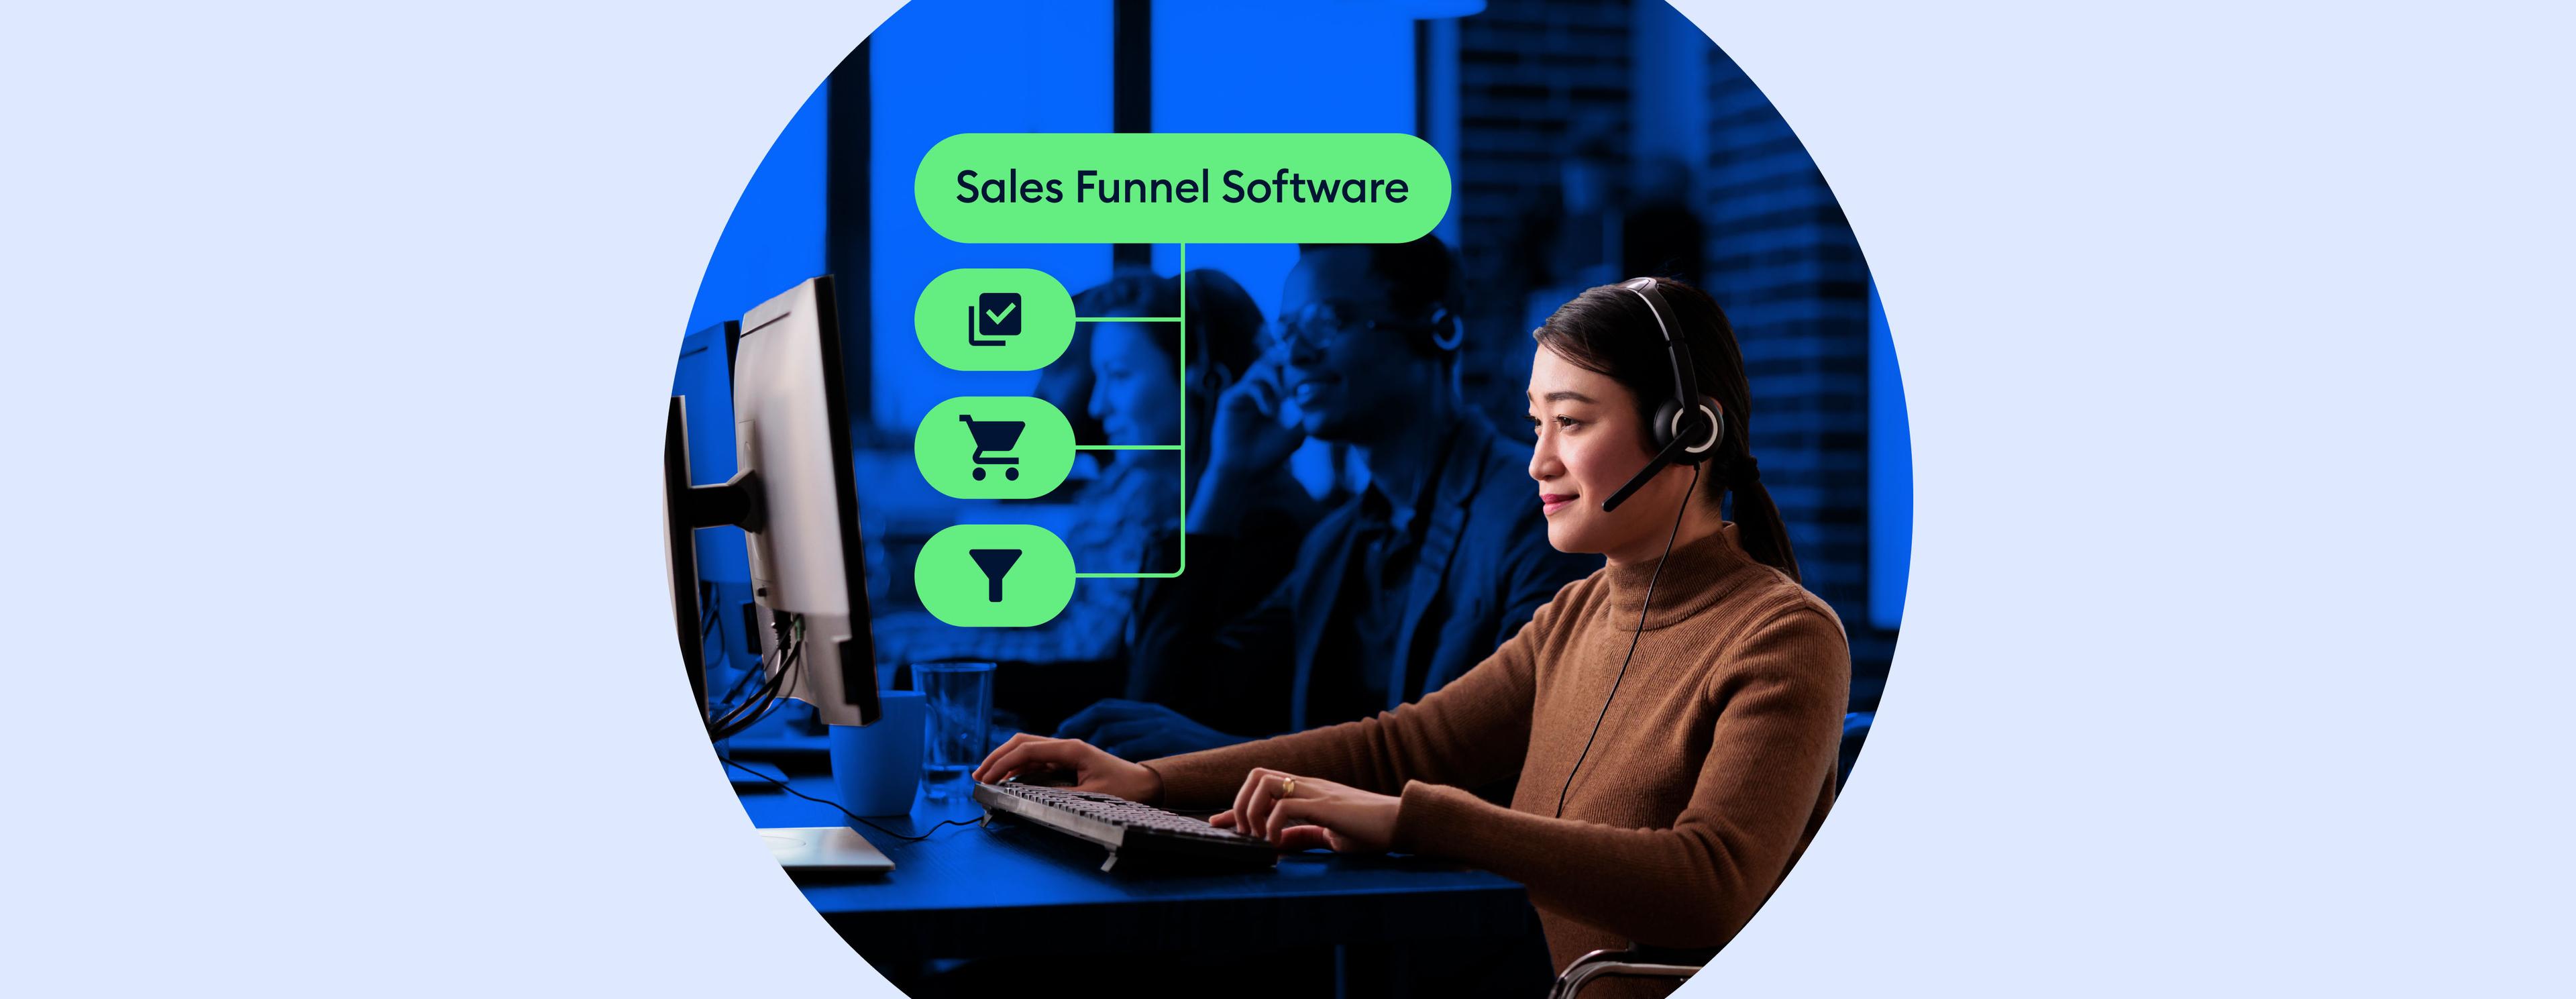 sales funnel software cover image